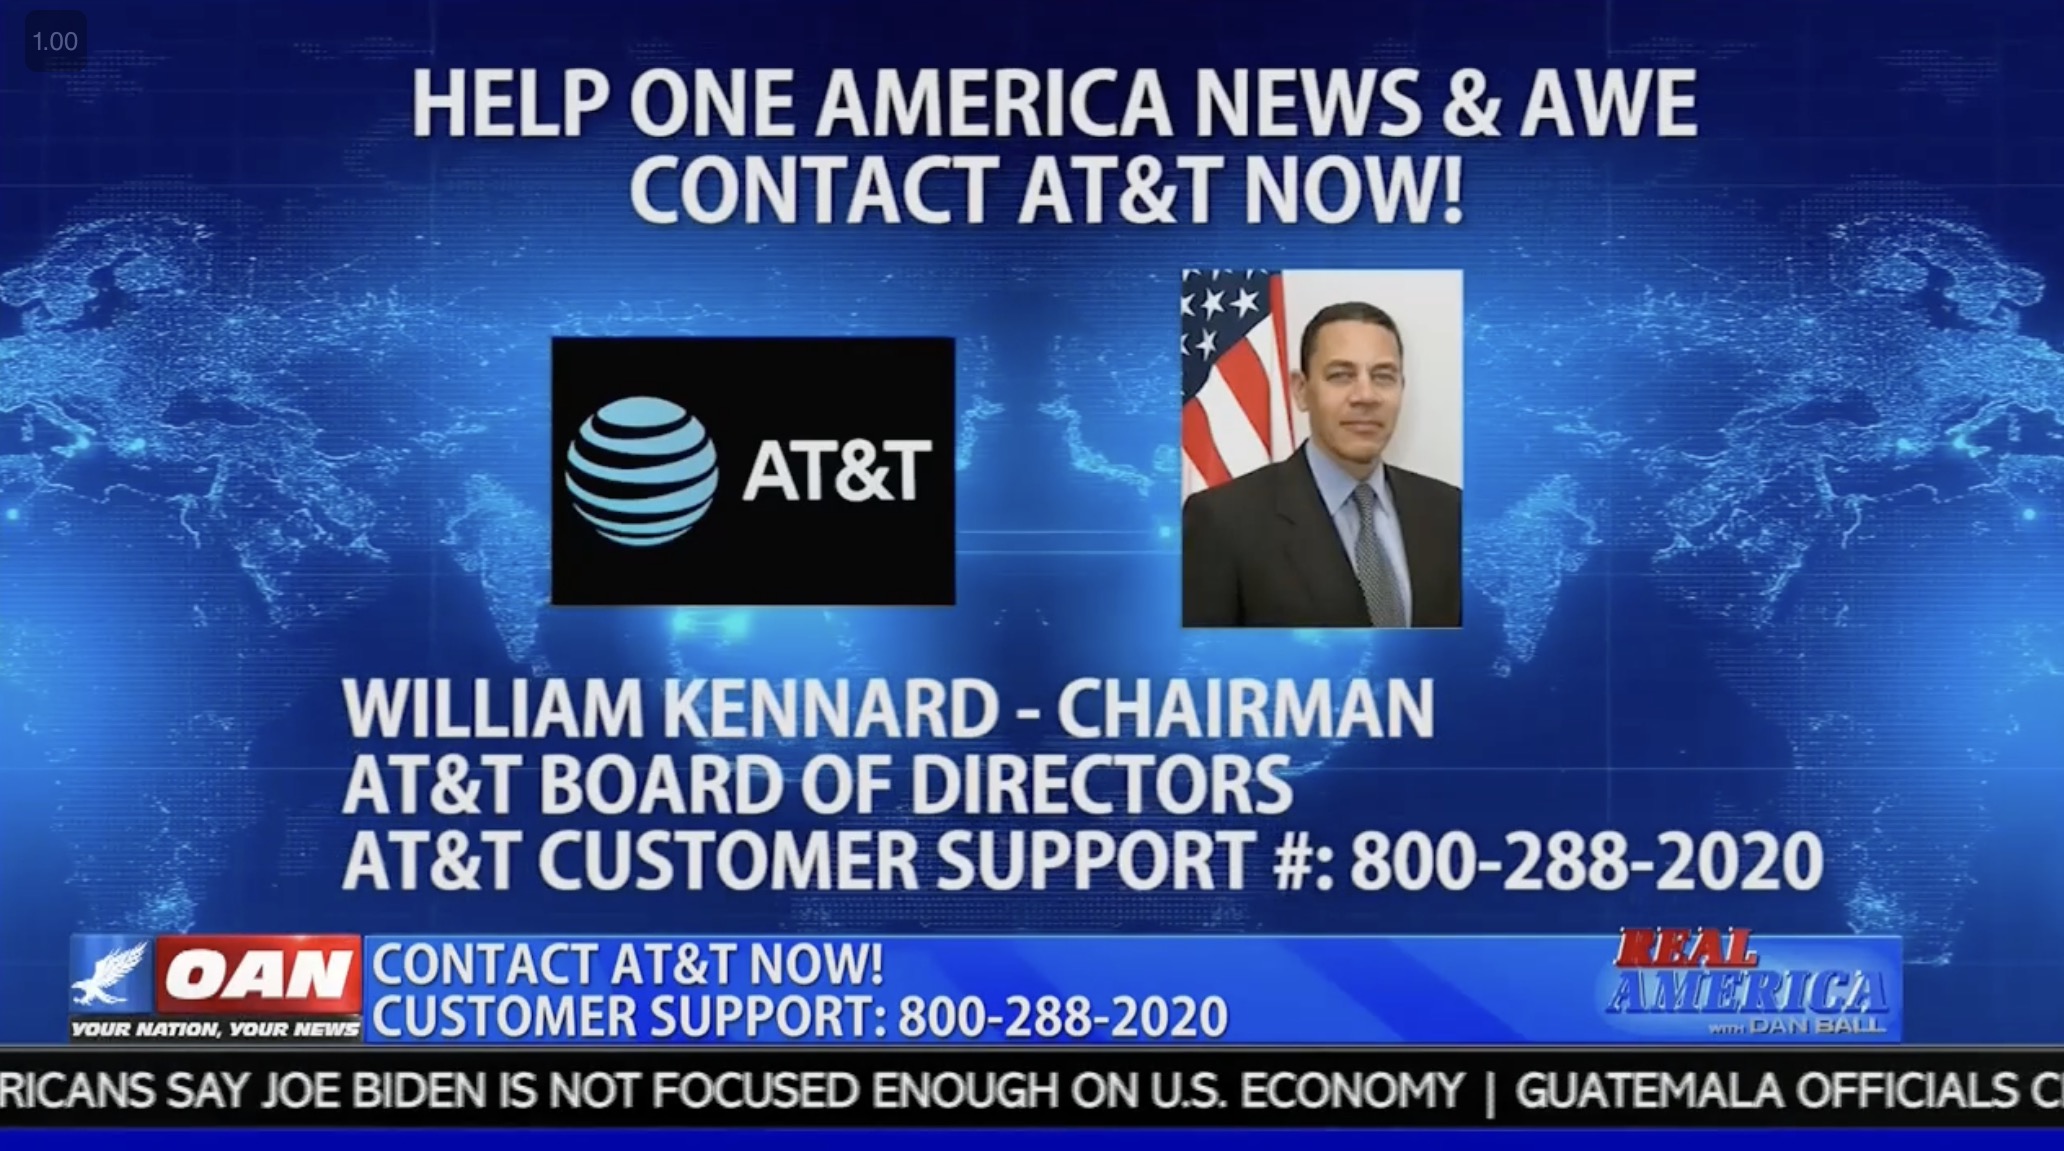 OAN graphic urging people to contact AT&T.